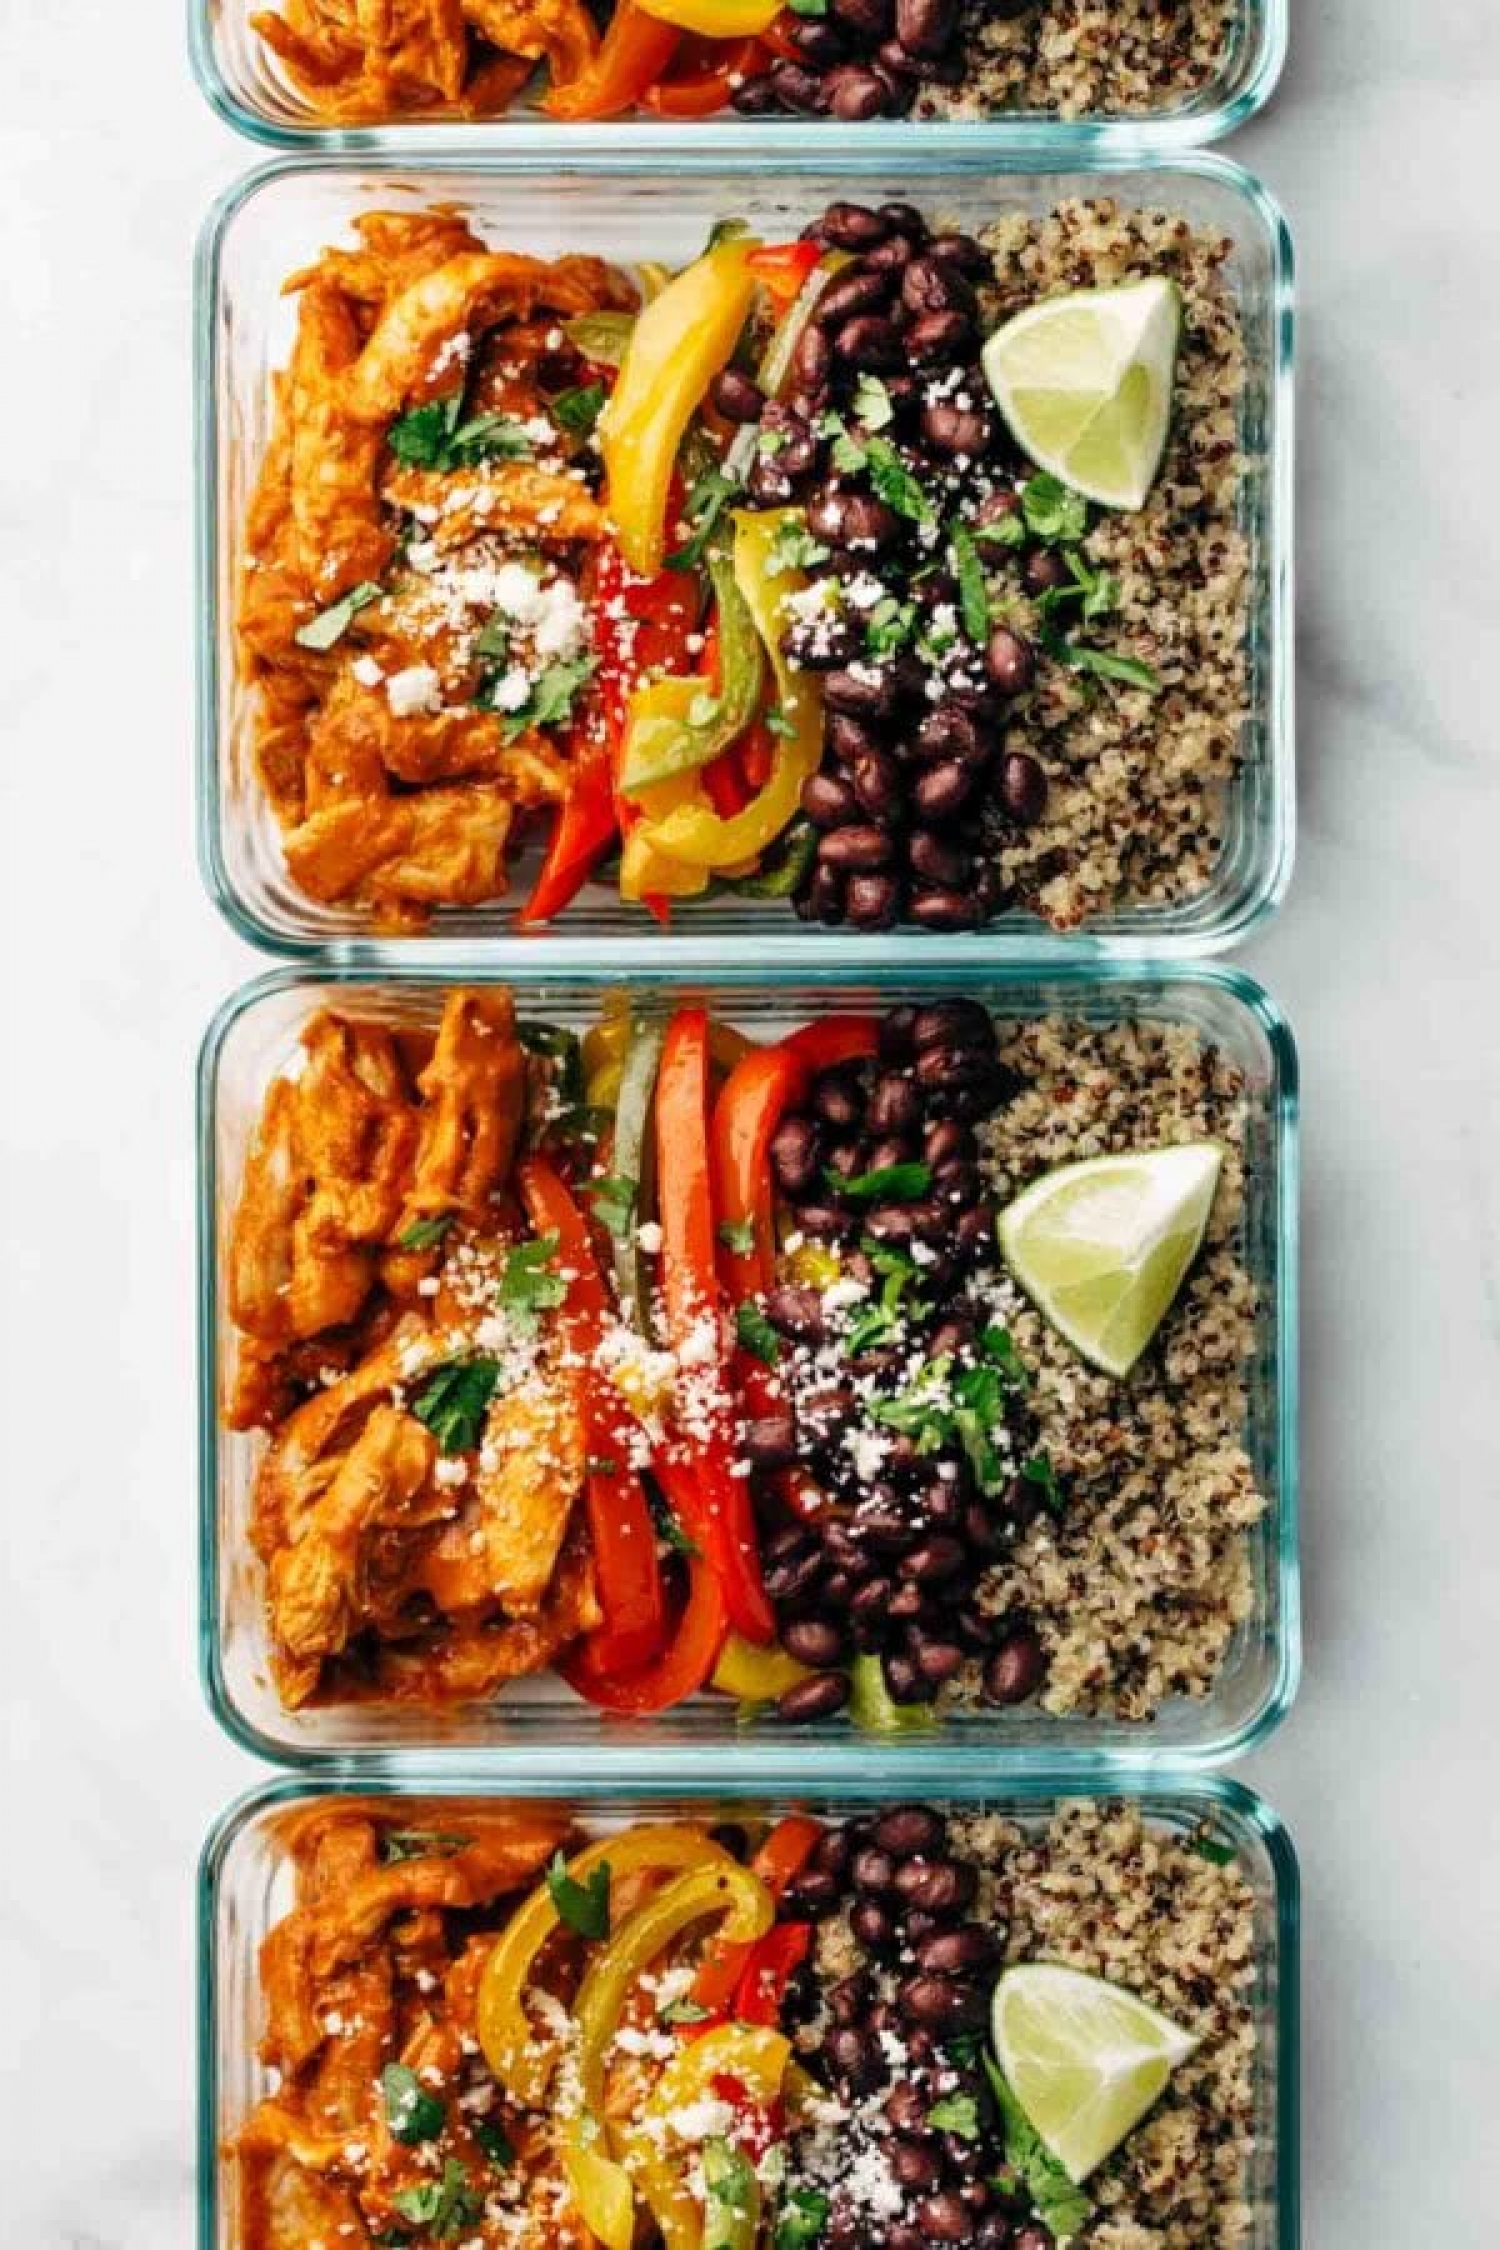 50 Sheet Pan Dinners for Lazy Weeknights